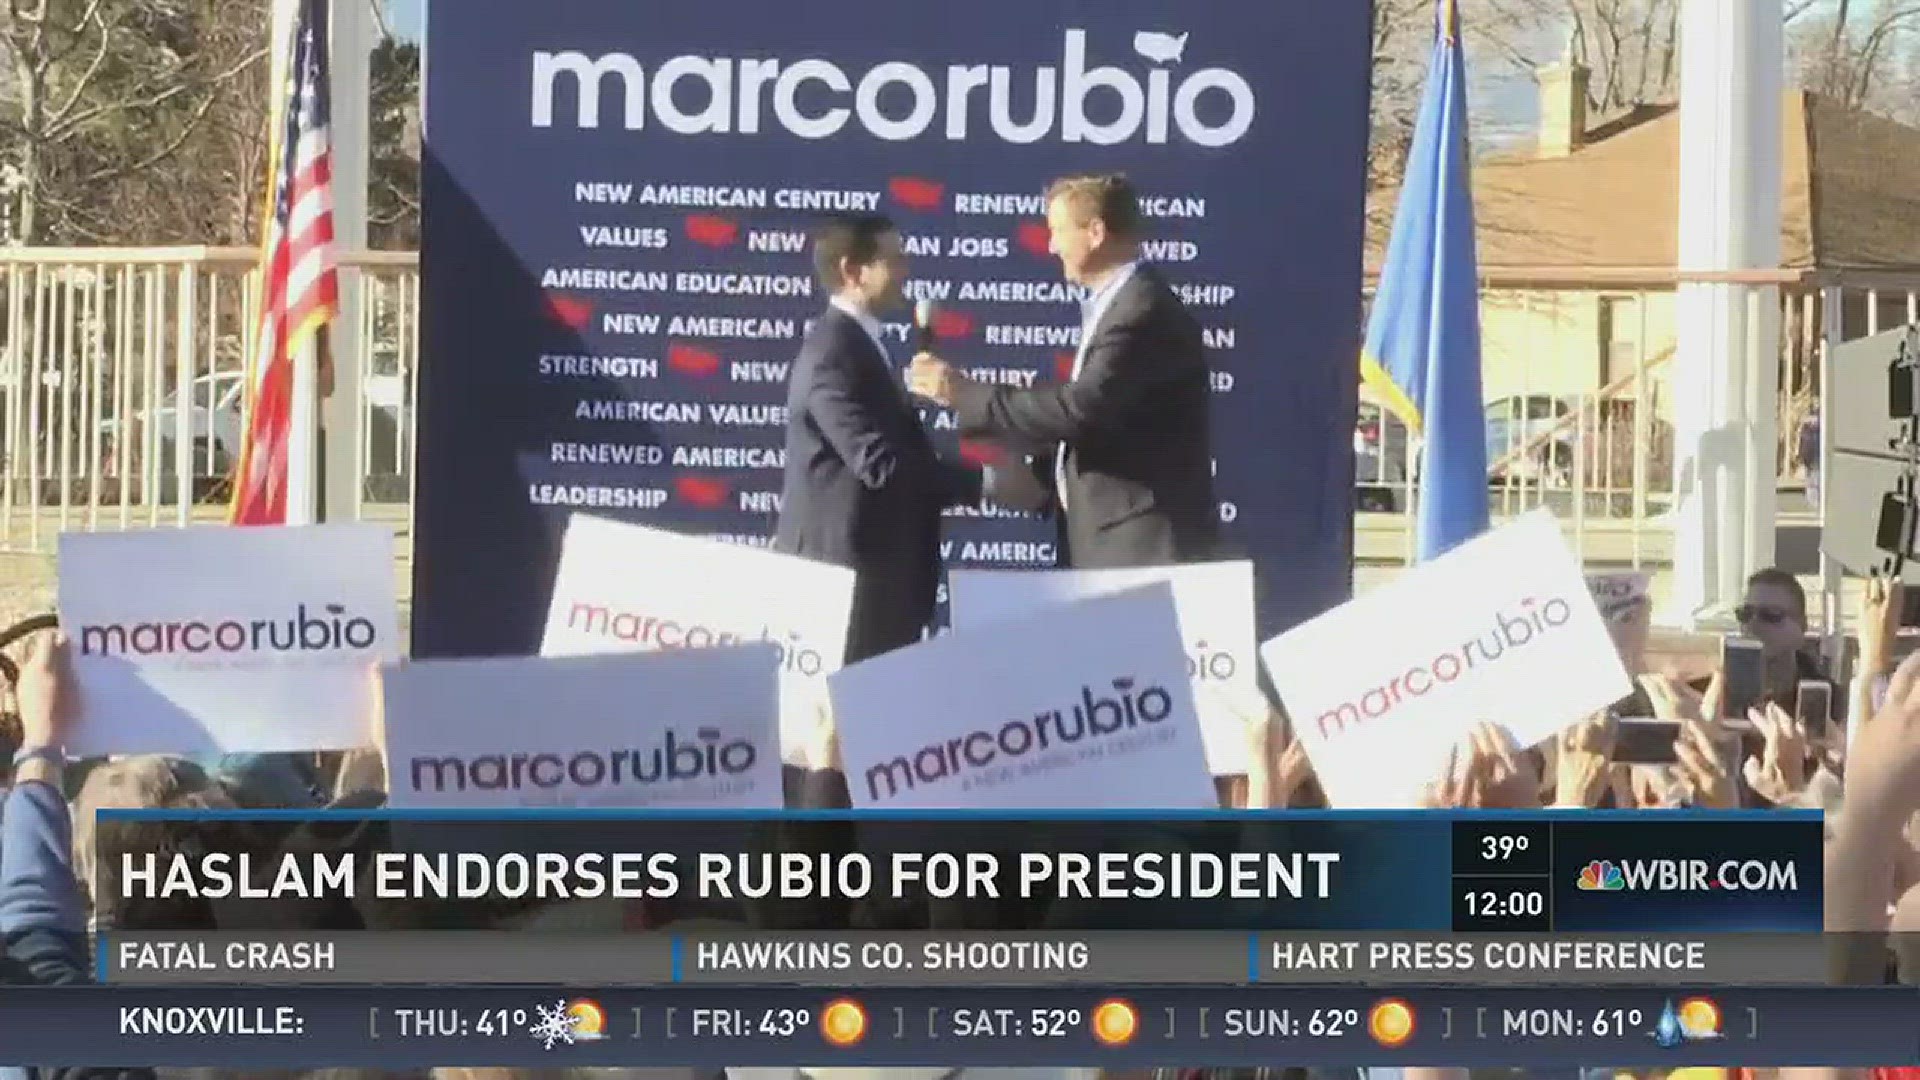 Tennessee Gov. Bill Haslam is endorsing Marco Rubio in the Republican presidential primary. Super Tuesday is March 1.